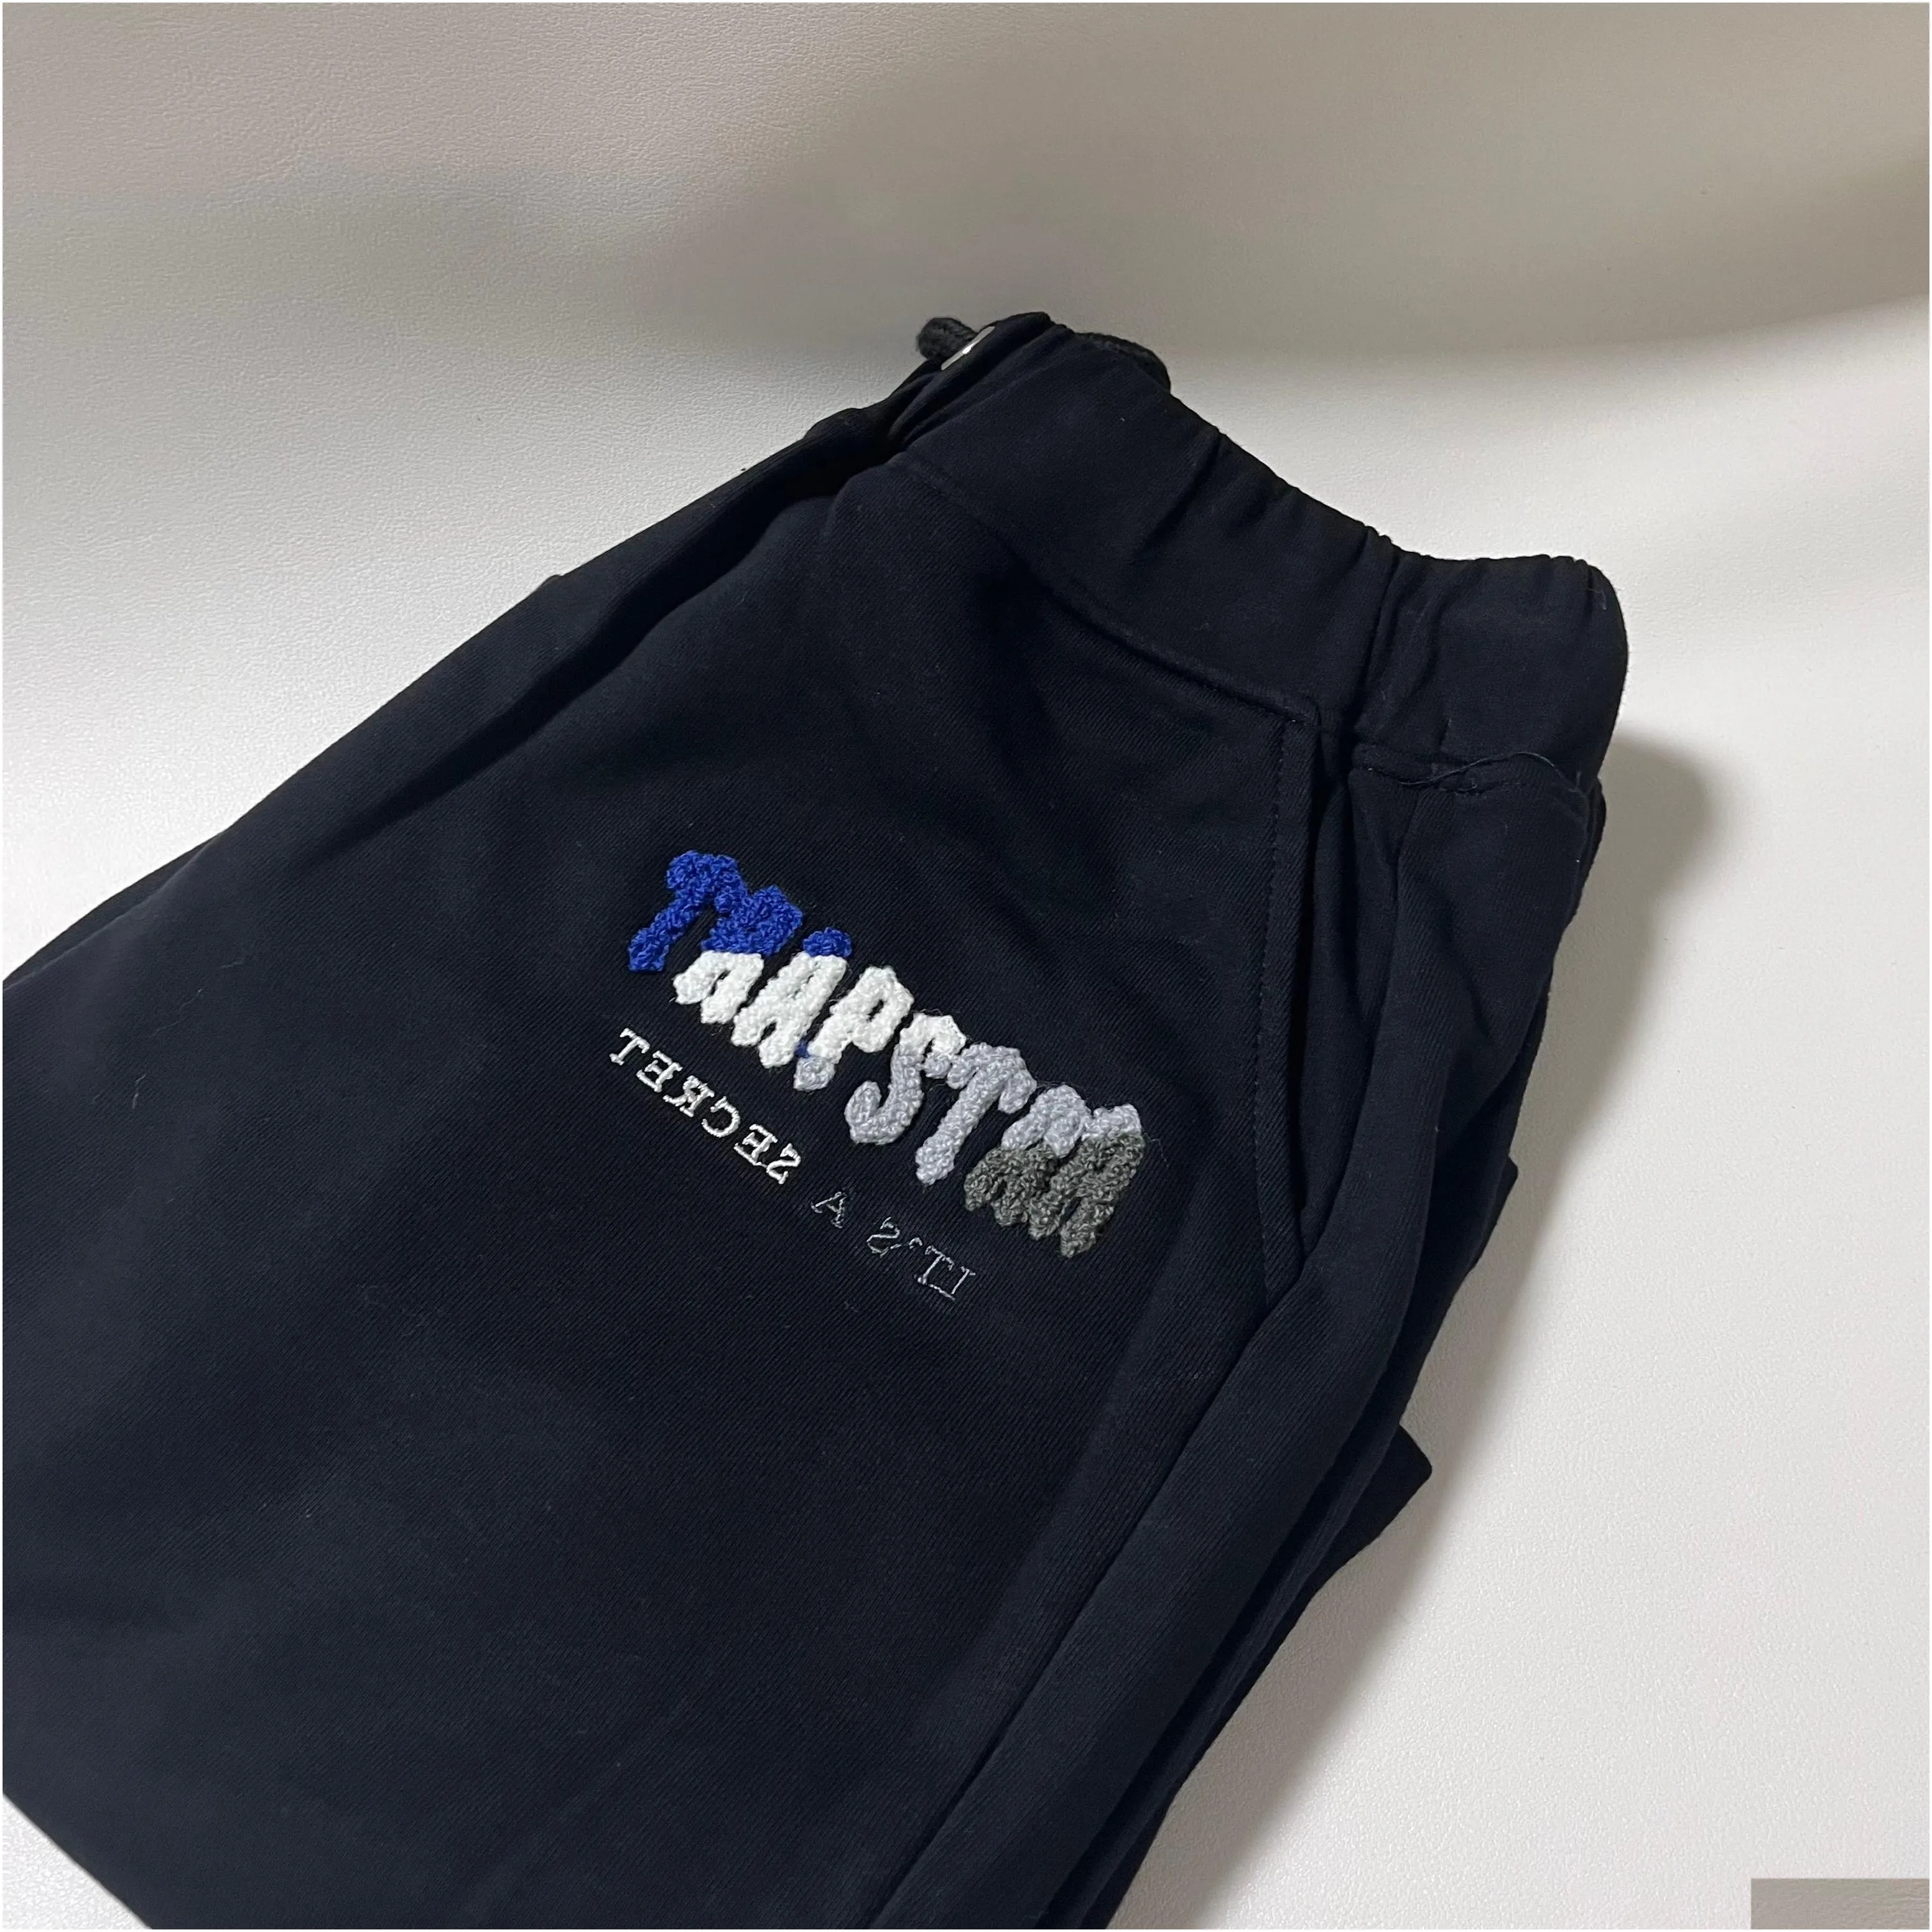 trapstar hoodie shorts t-shirts embroidery plush sweater fashion clothing matching drawstring trousers size s-xl with dust opp bag